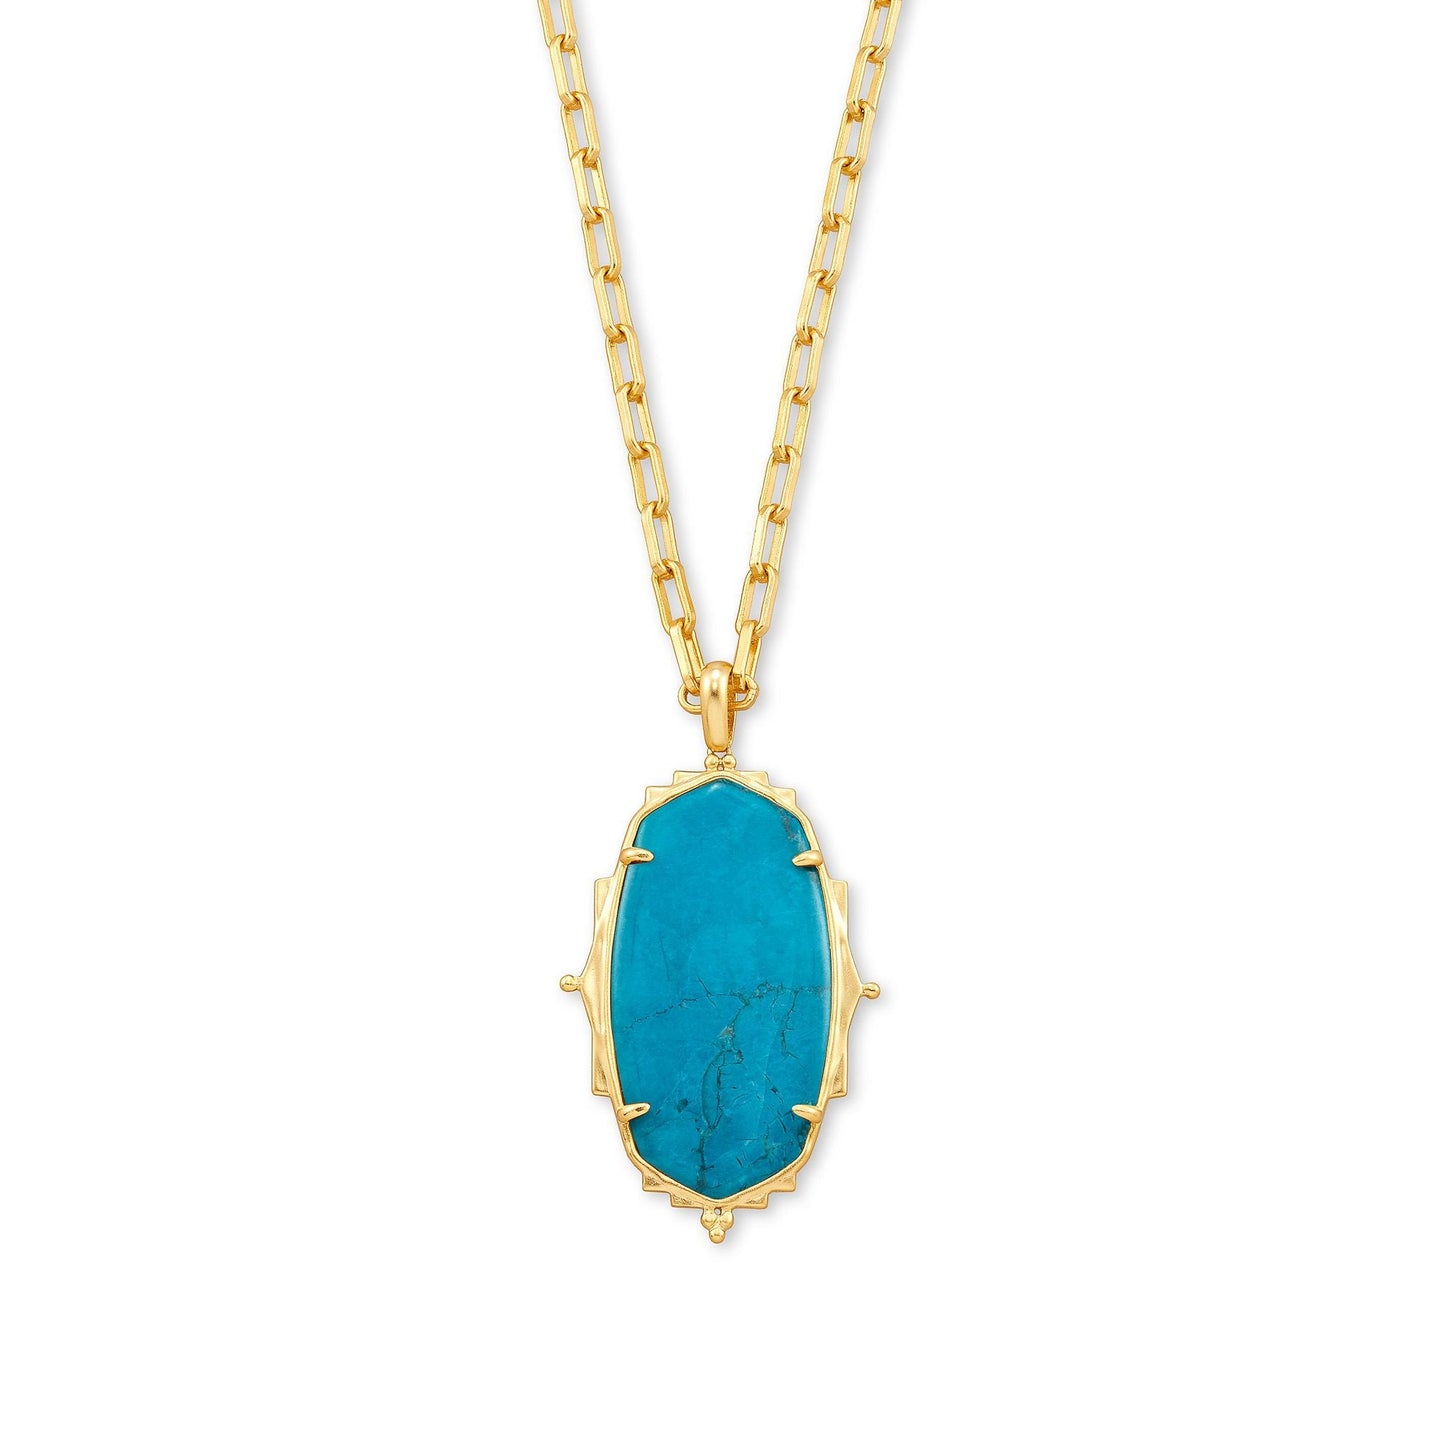 Fall 2 Baroque Ella Pendant Necklace In Gold Teal Howlite